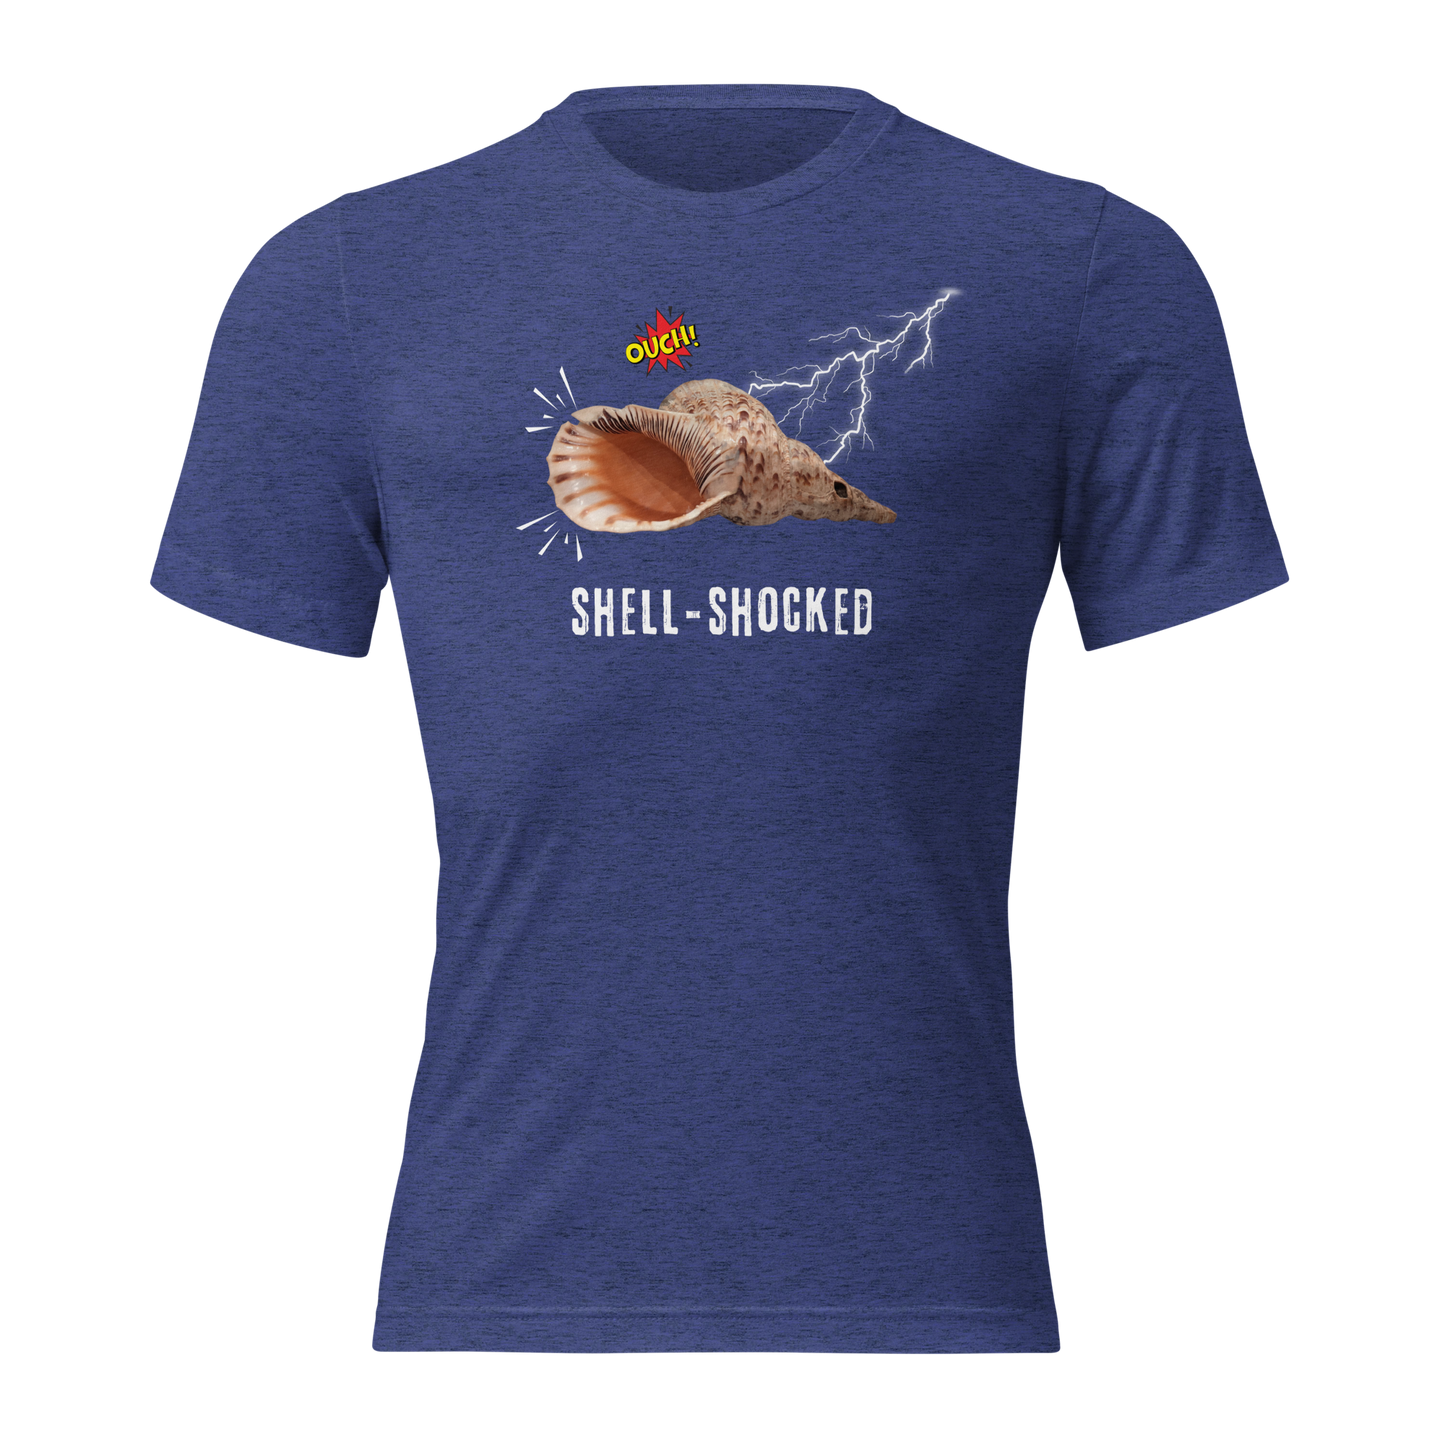 Unisex, graphics, tee-shirt, funny, shell, shocked, humor, traumatized, electricity, casual, gift, t-shirt